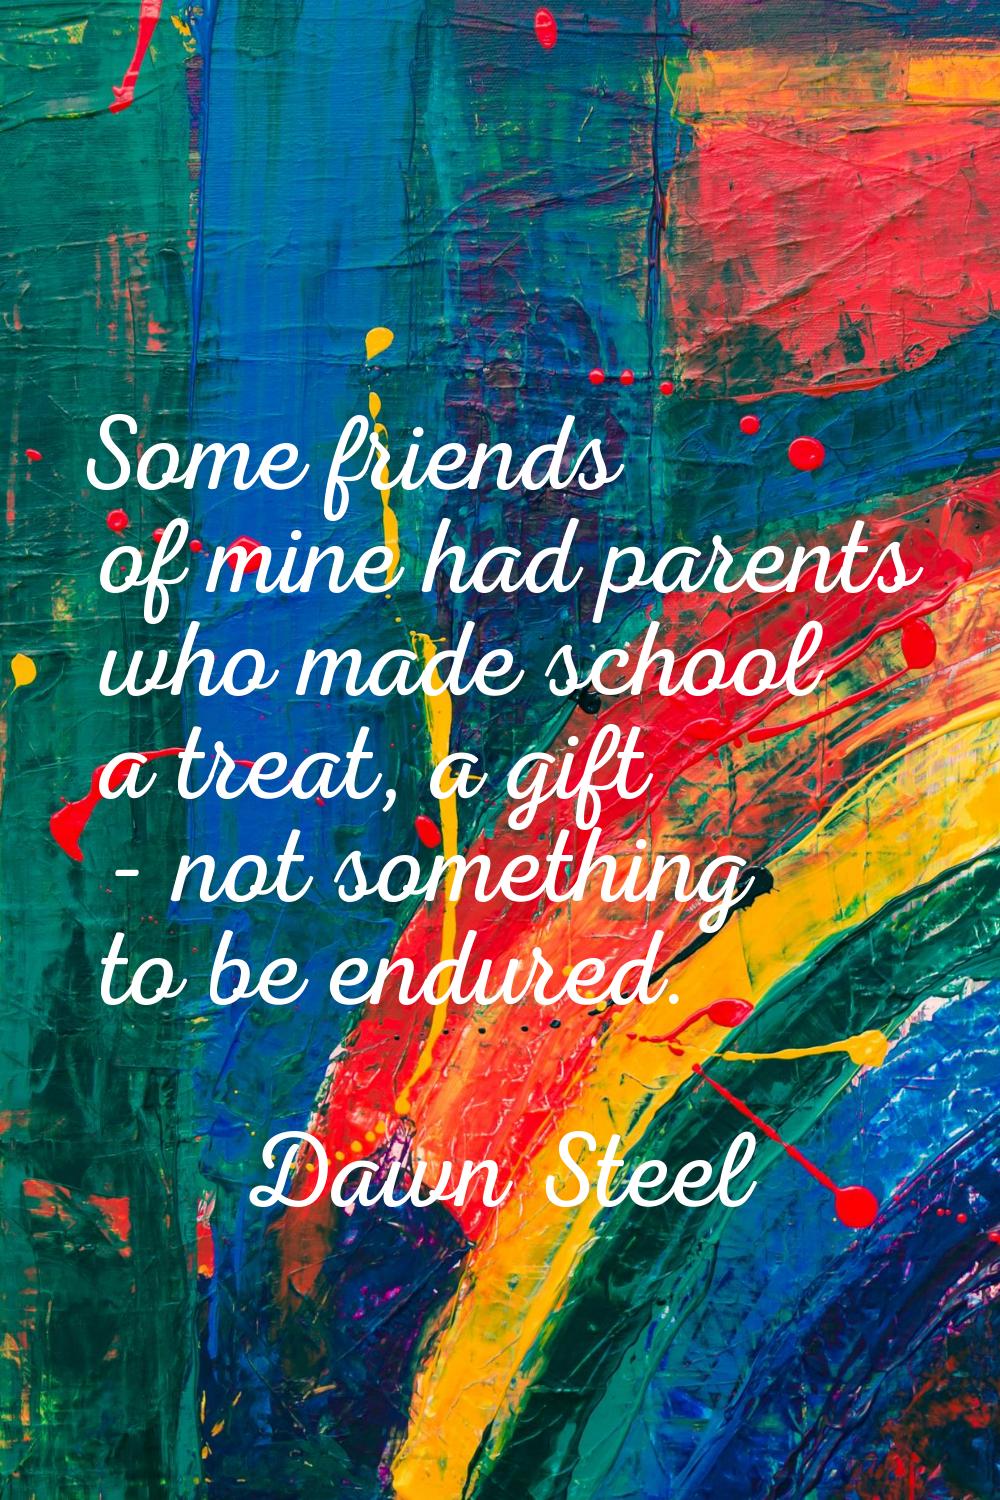 Some friends of mine had parents who made school a treat, a gift - not something to be endured.